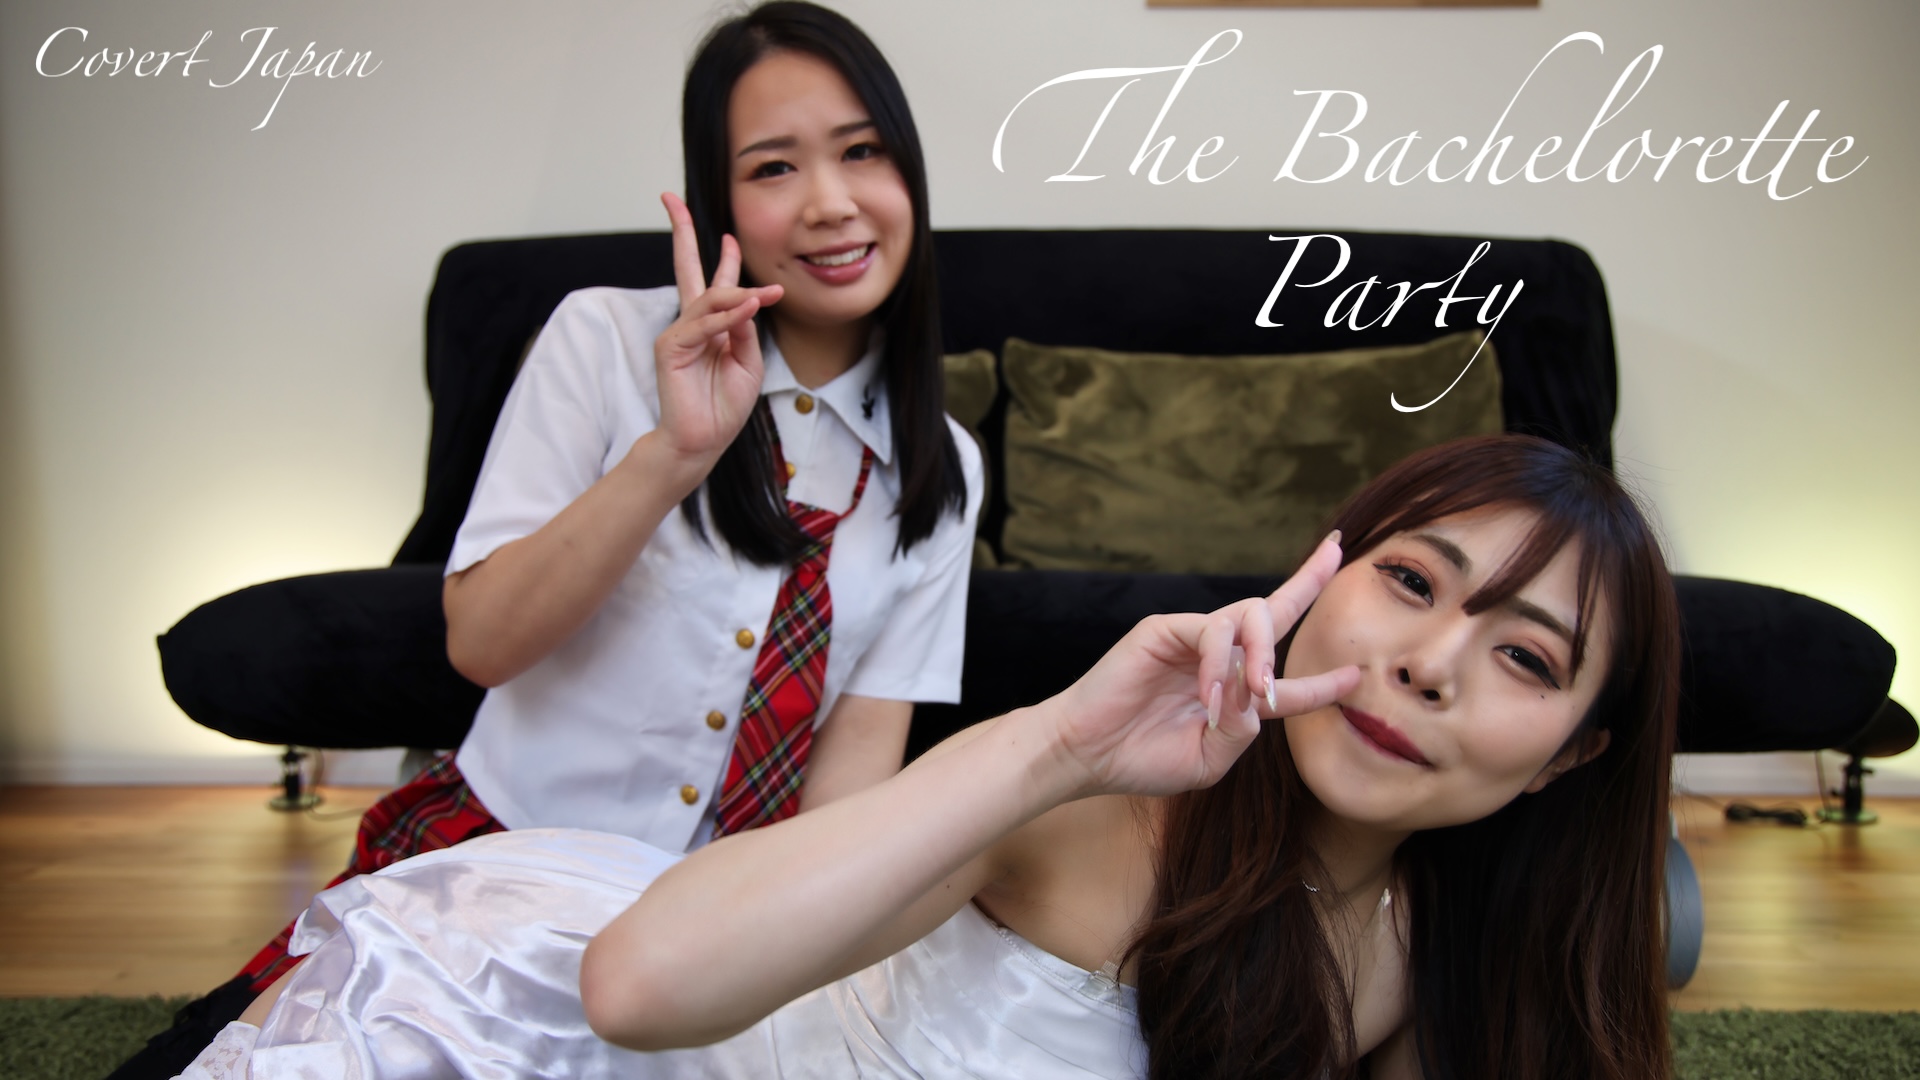 Misa, Mitsuka The Bachelorette Party CovertJapan